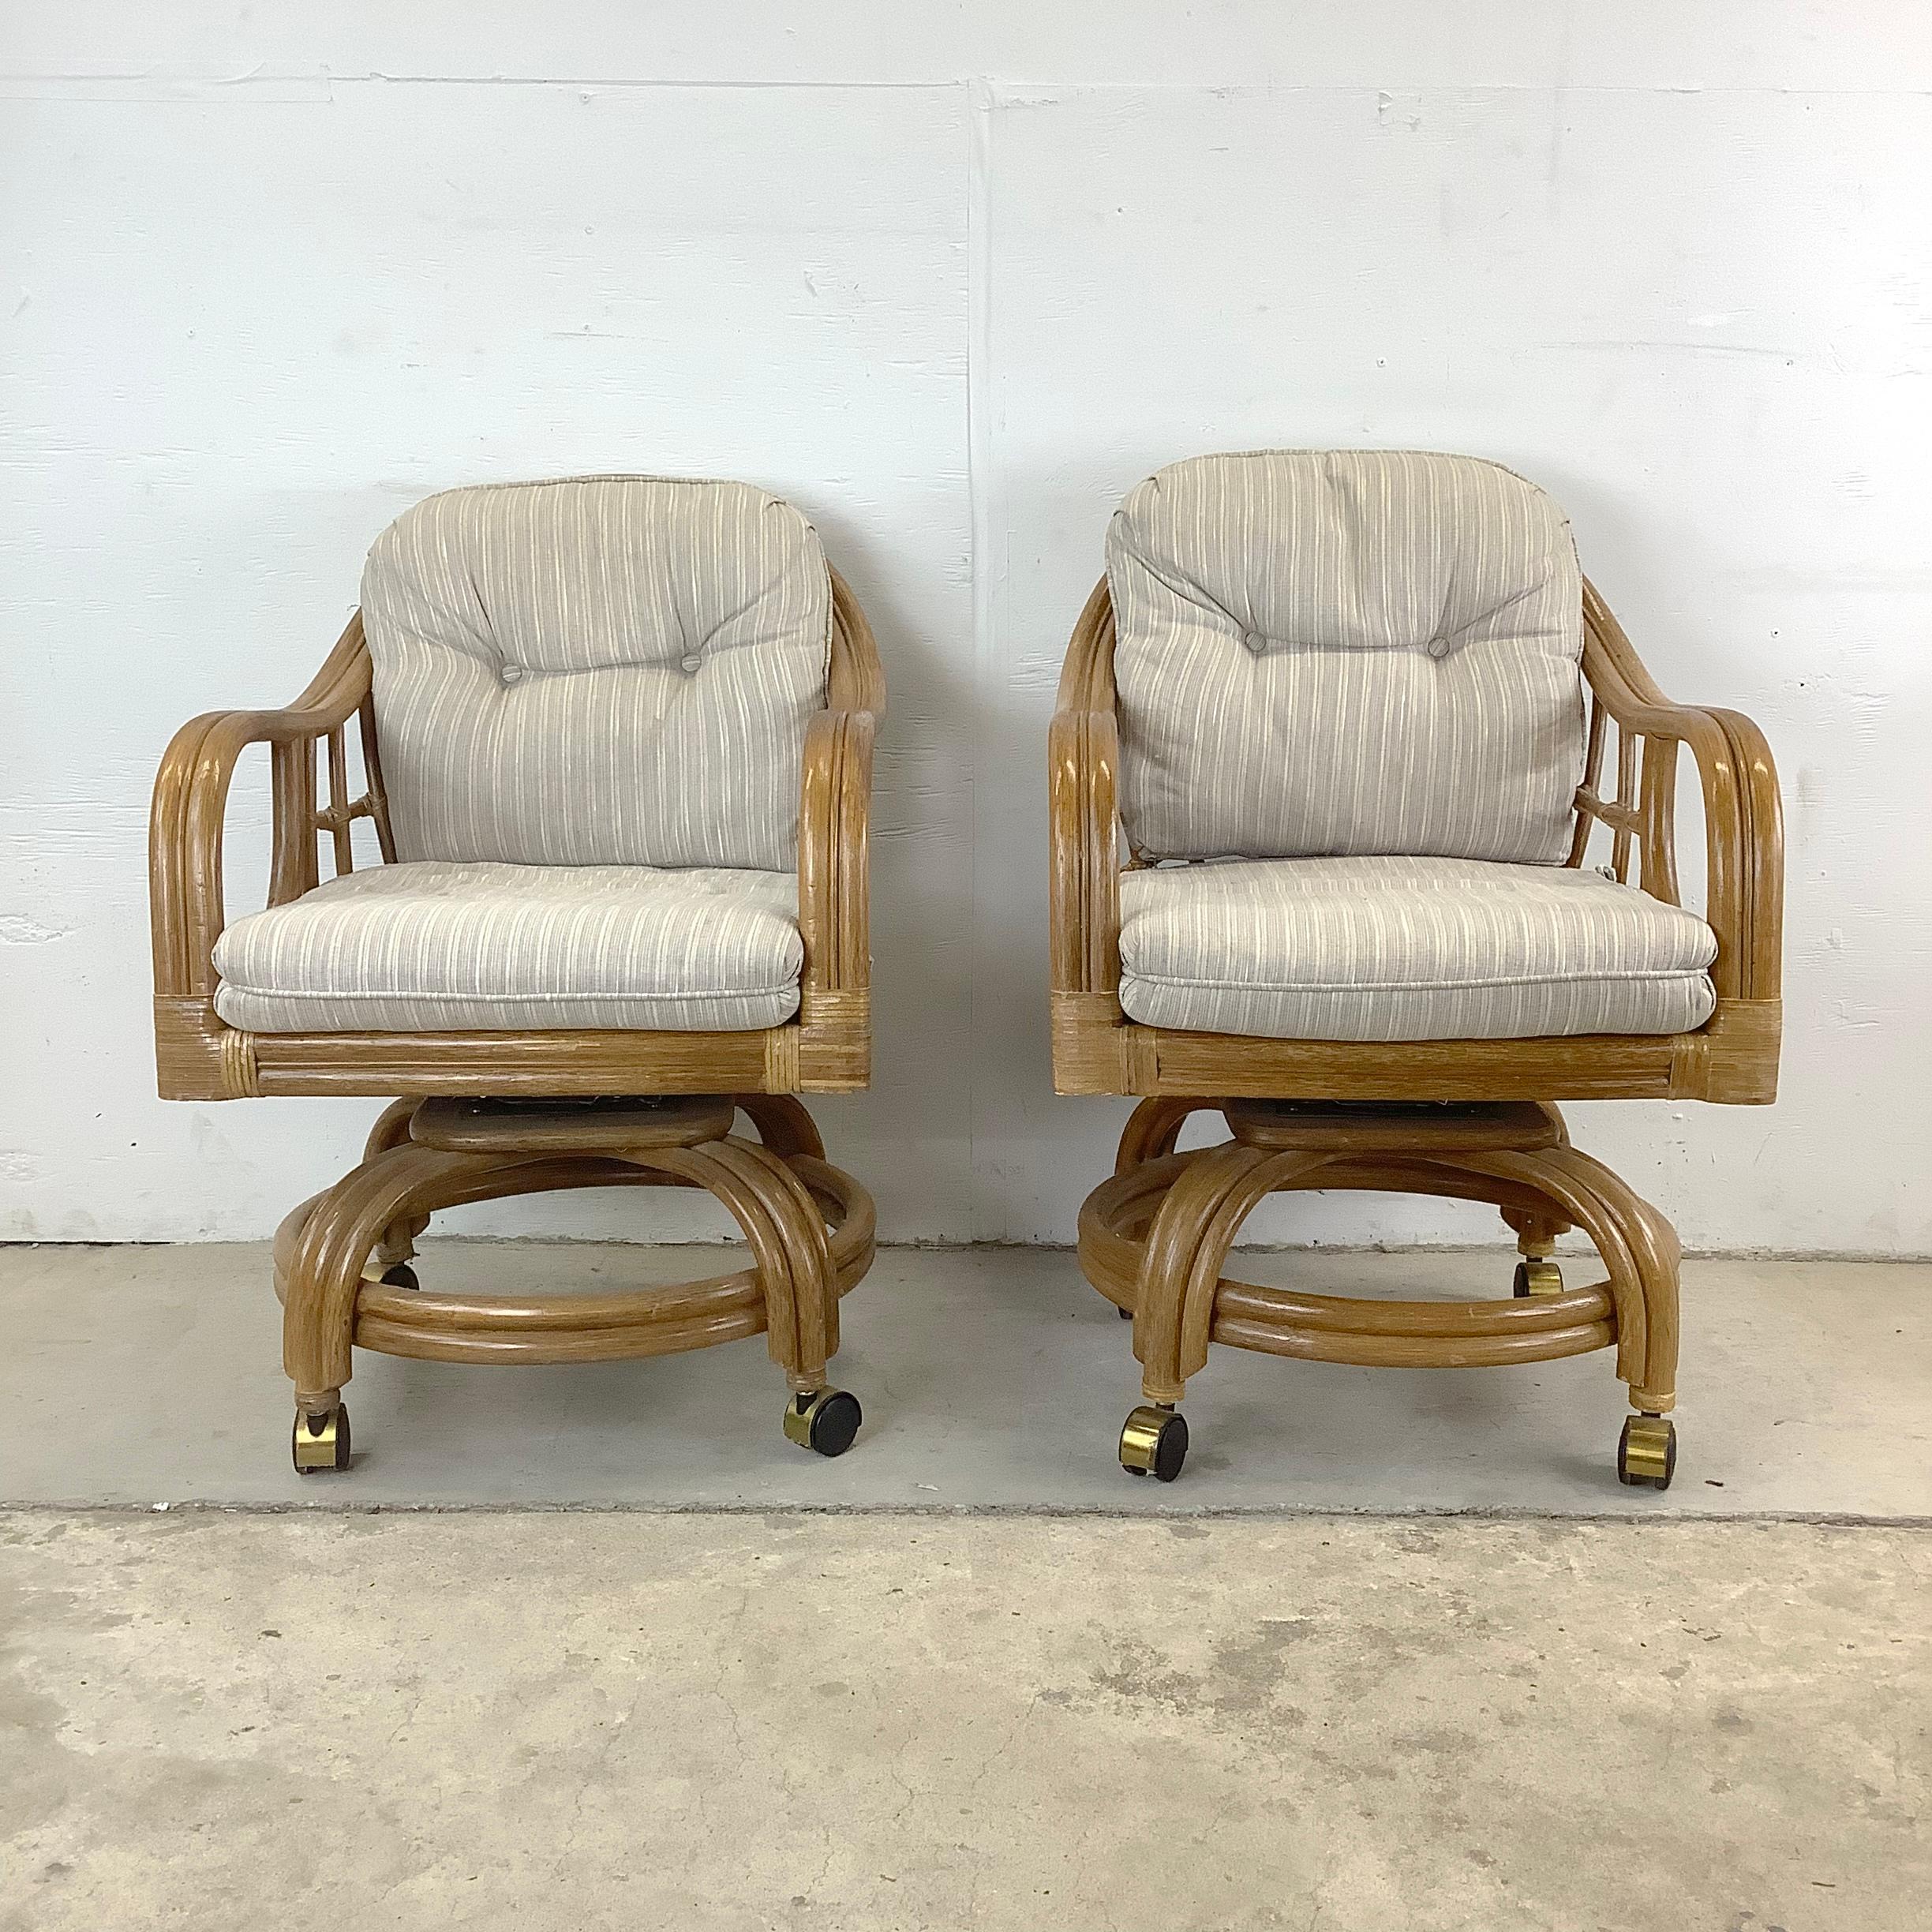 Welcome to the coastal boho world of Lane Venture, where vintage design meets unparalleled craftsmanship. This set of four coastal rolling dining chairs is a true representation of this esteemed lineage. Made from the finest bamboo and rattan, these